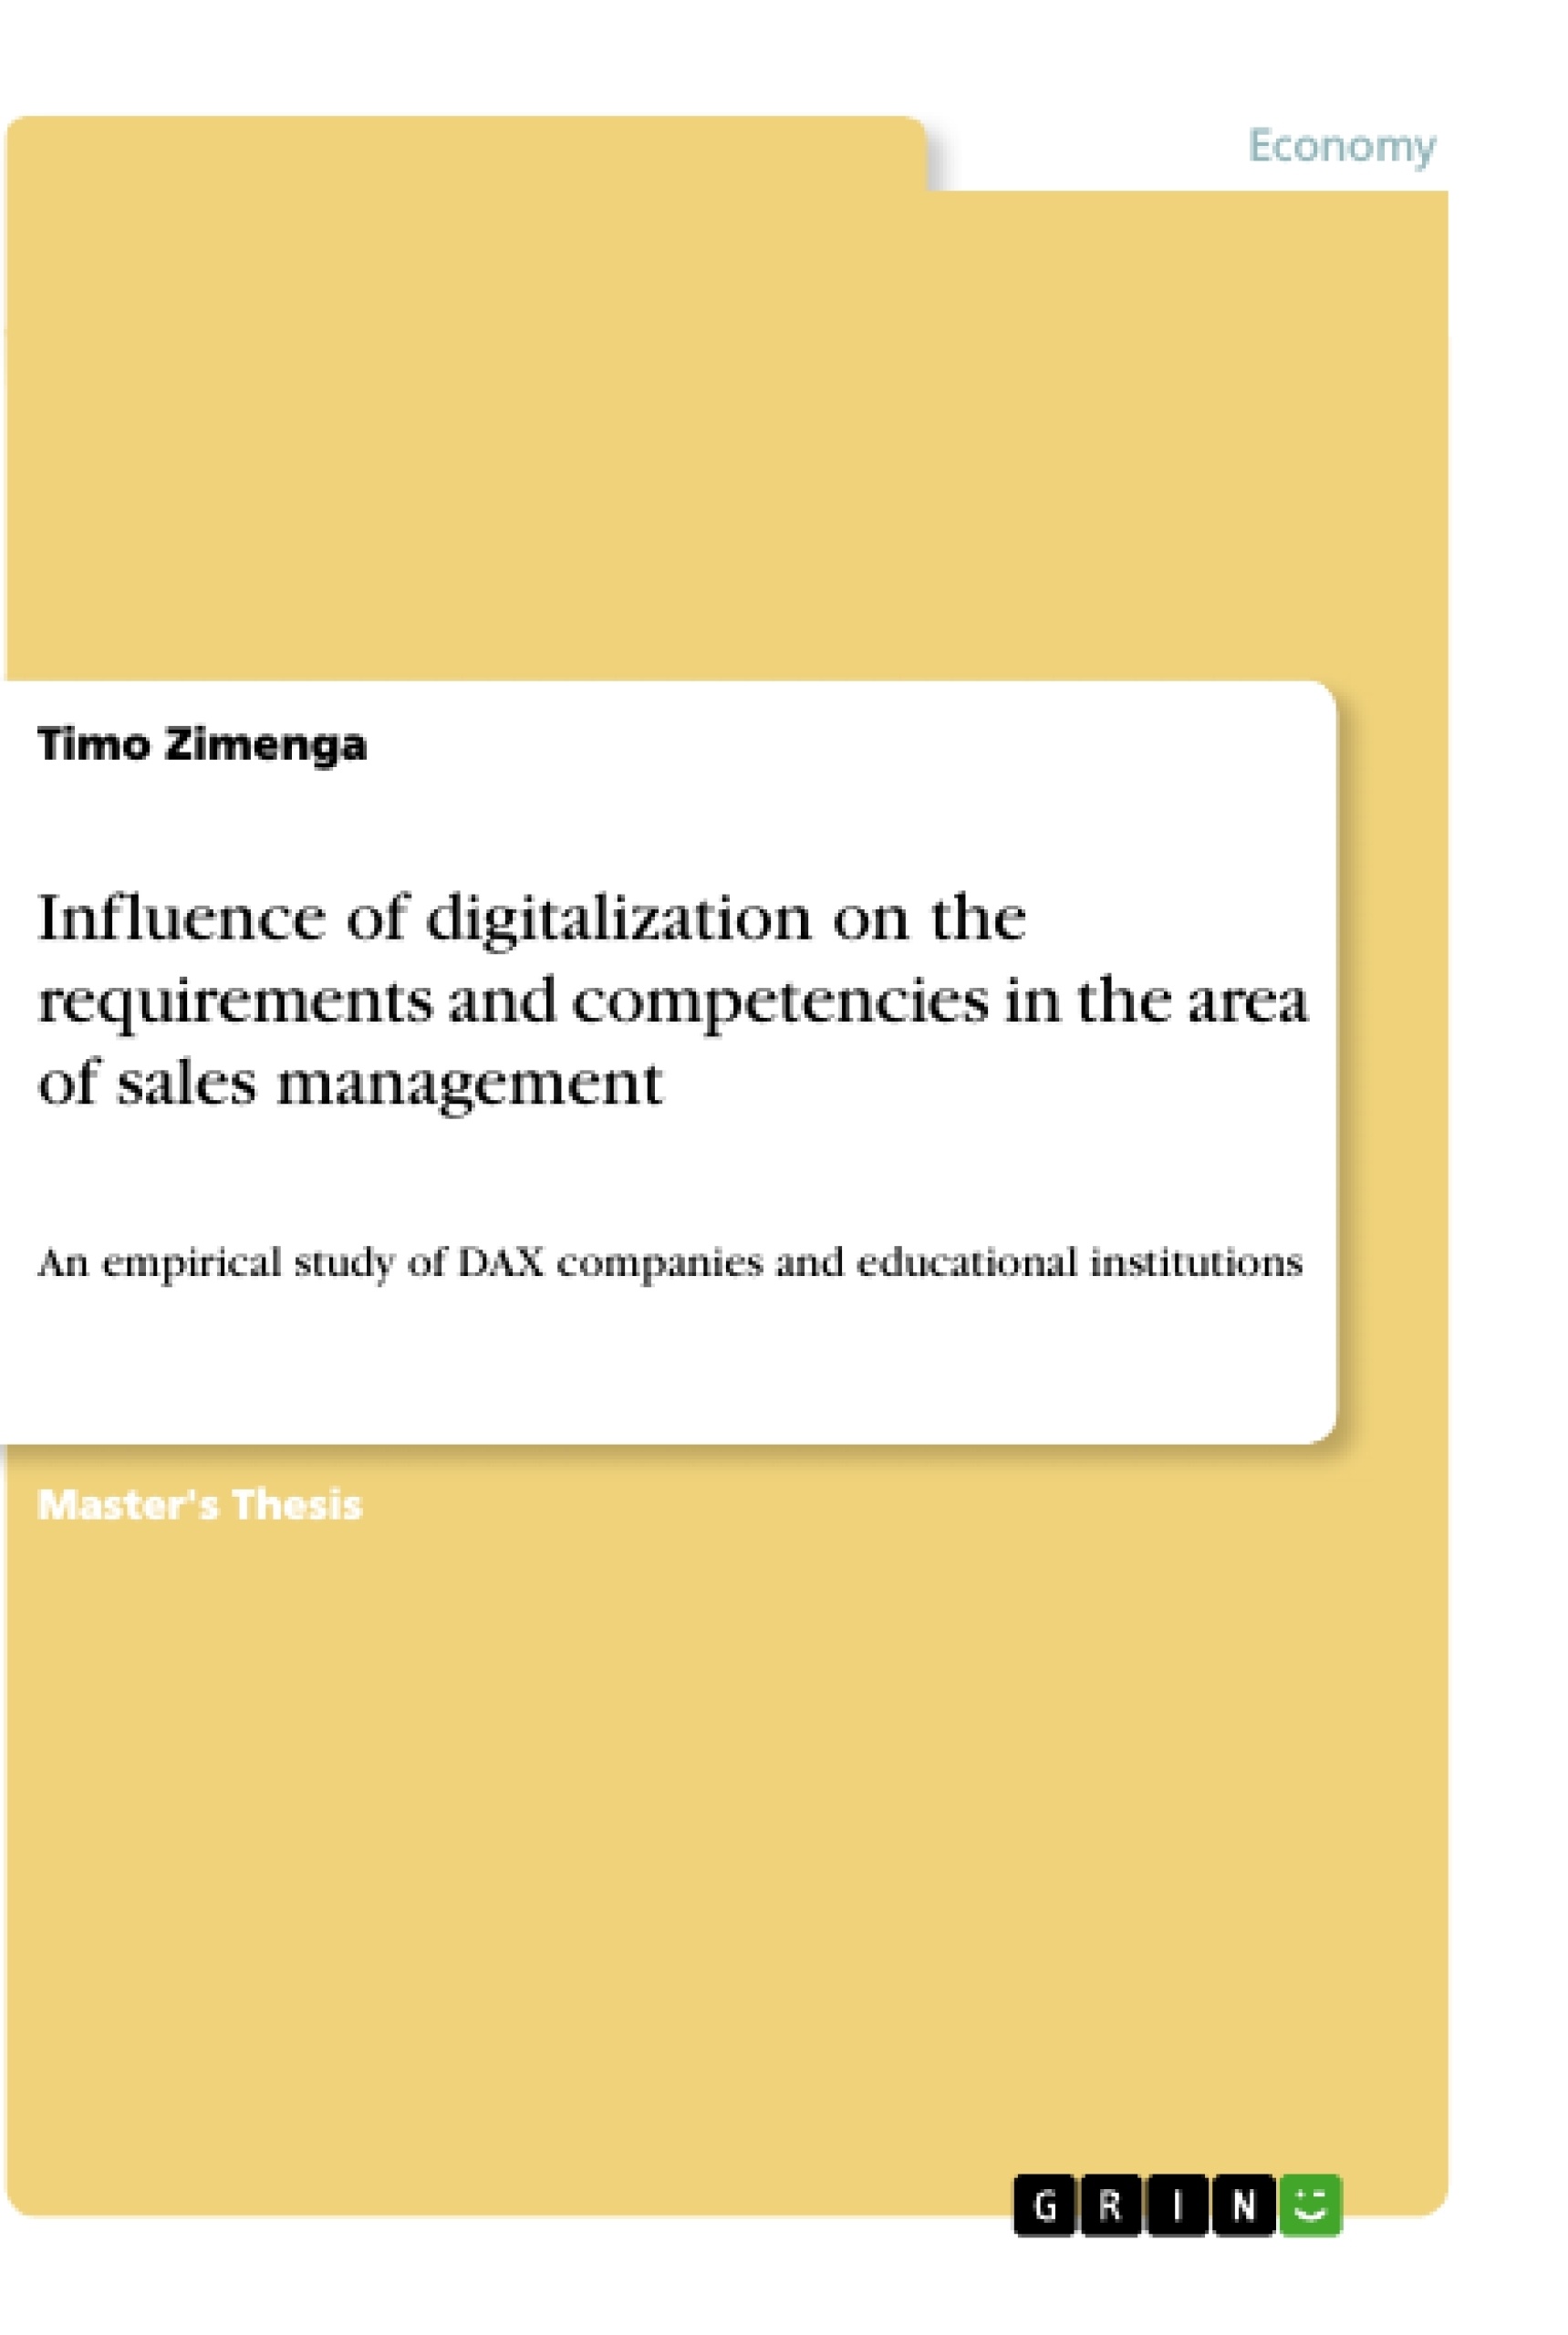 Title: Influence of digitalization on the requirements and competencies in the area of sales management